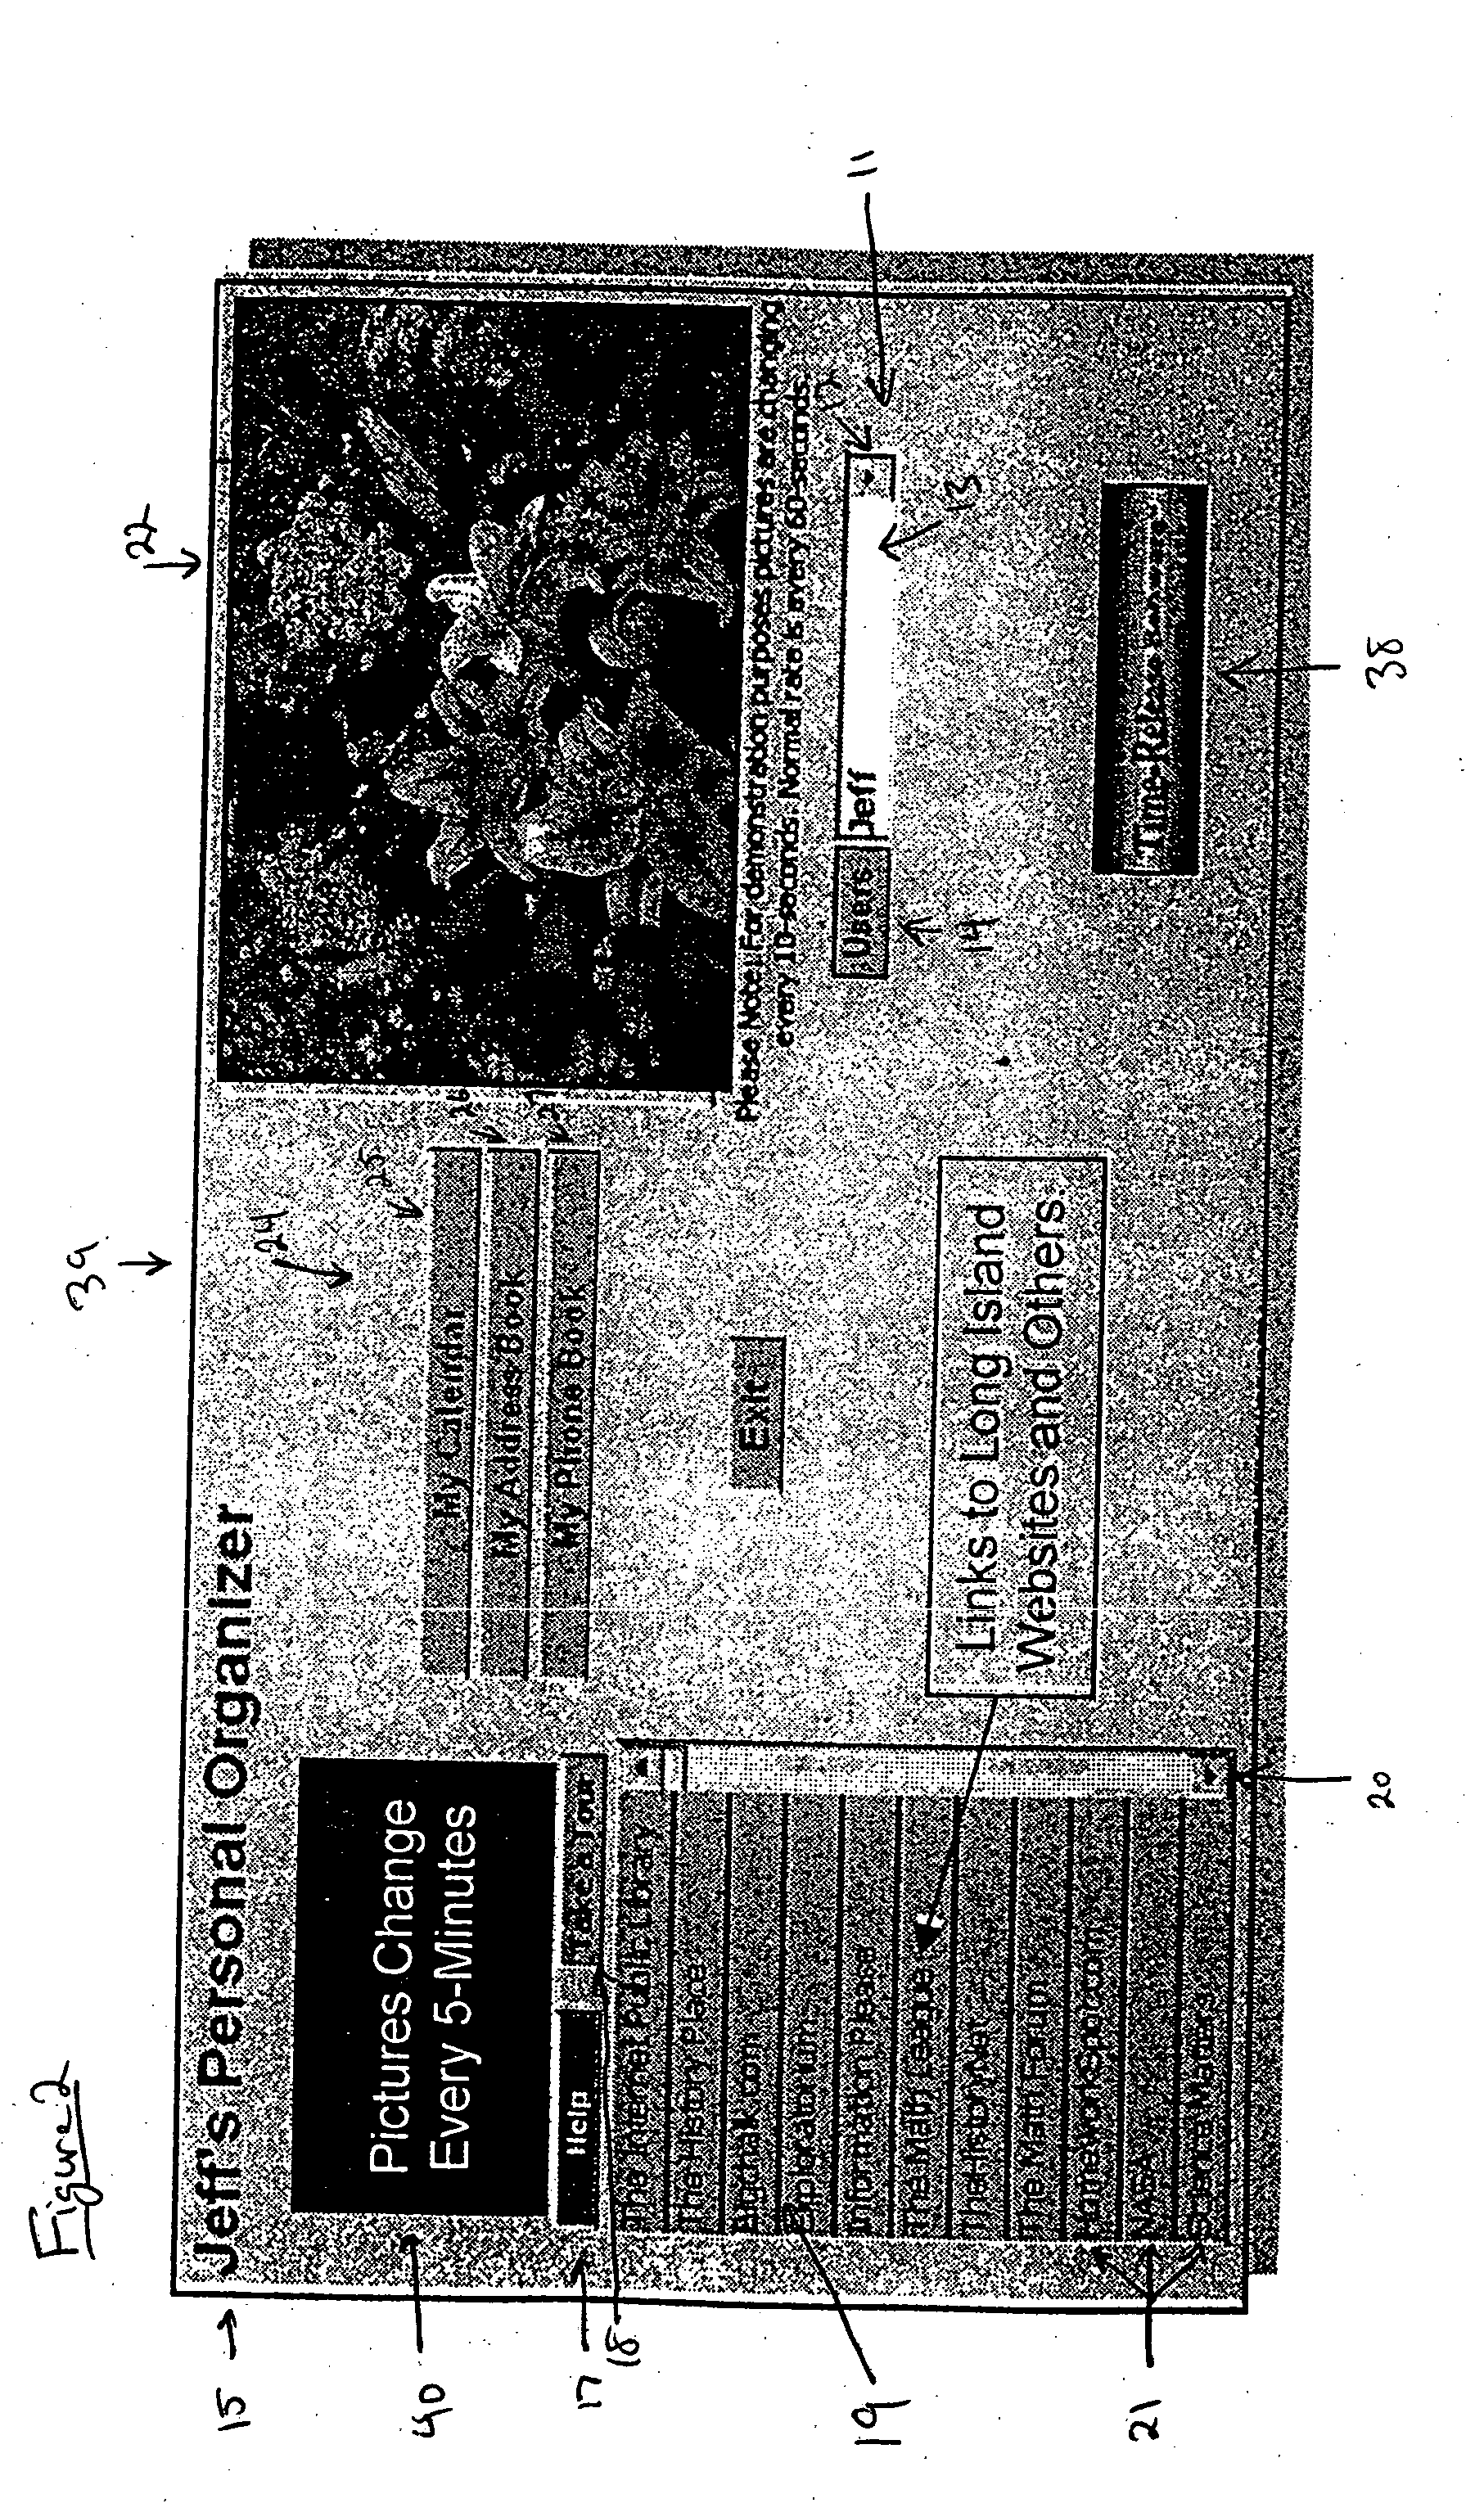 System, method and apparatus for software generated slide show